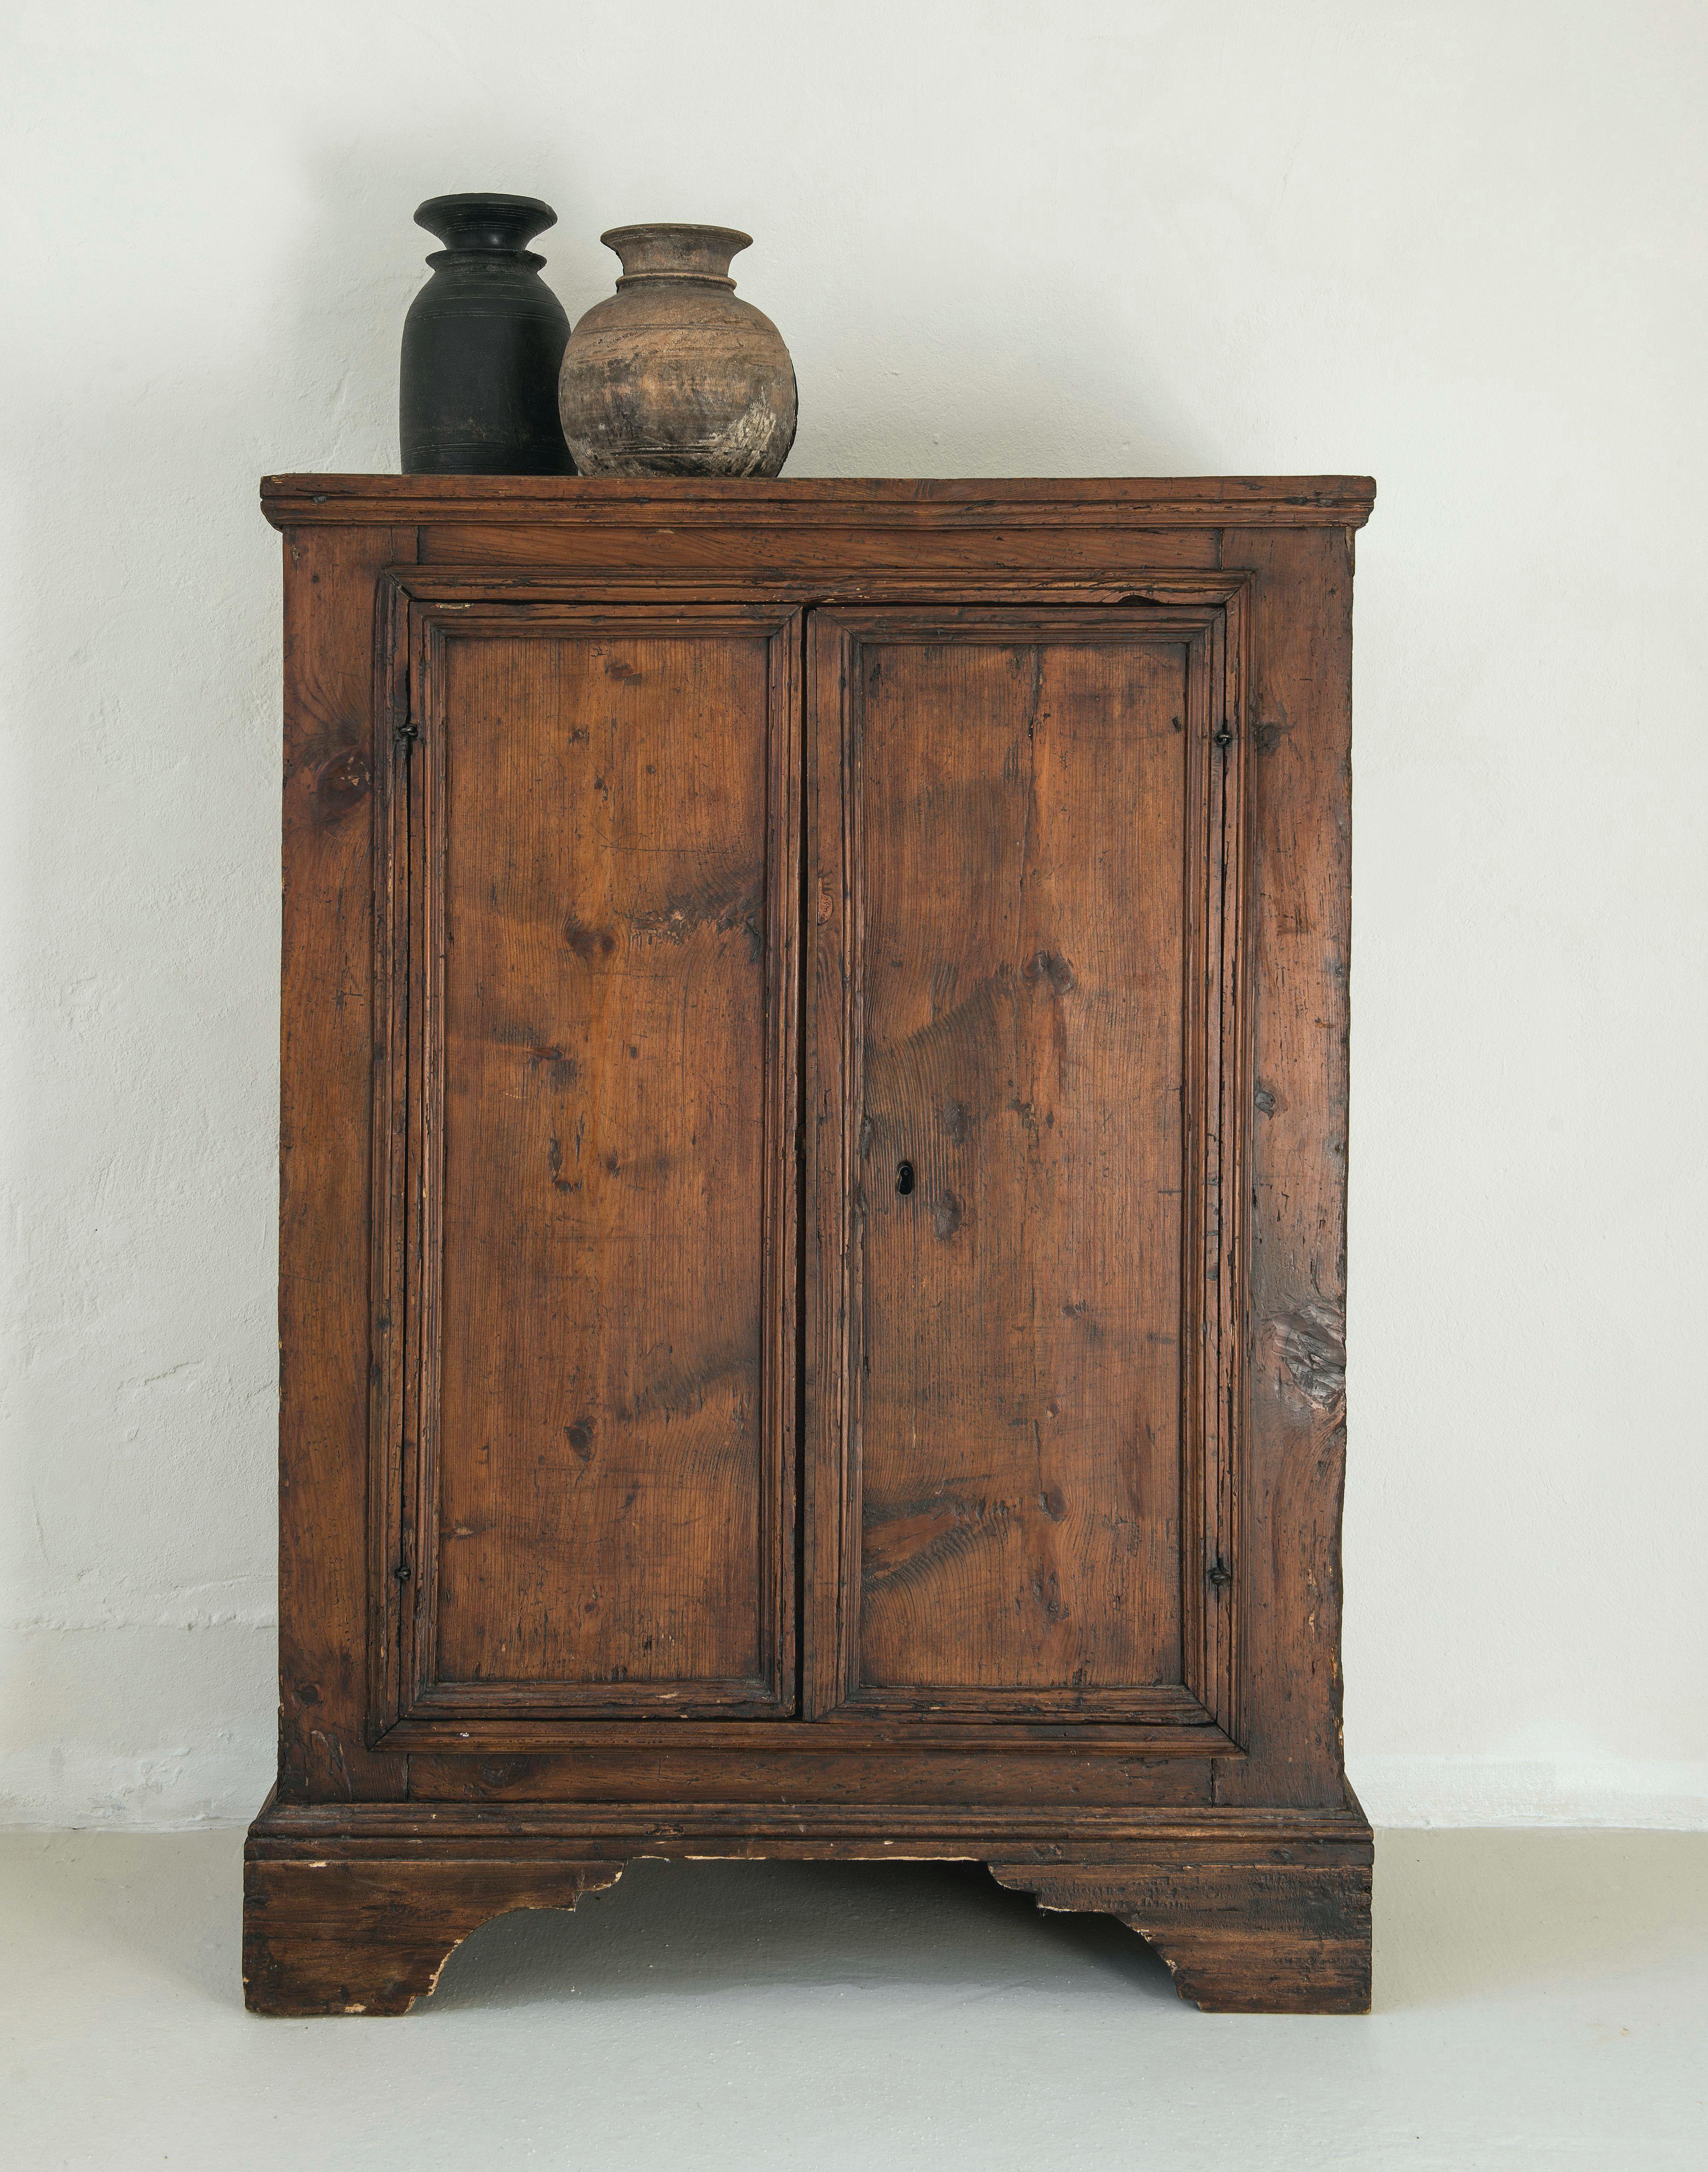 Chestnut Rare 17th- 18th Century Italian Cabinet with perfect patina 